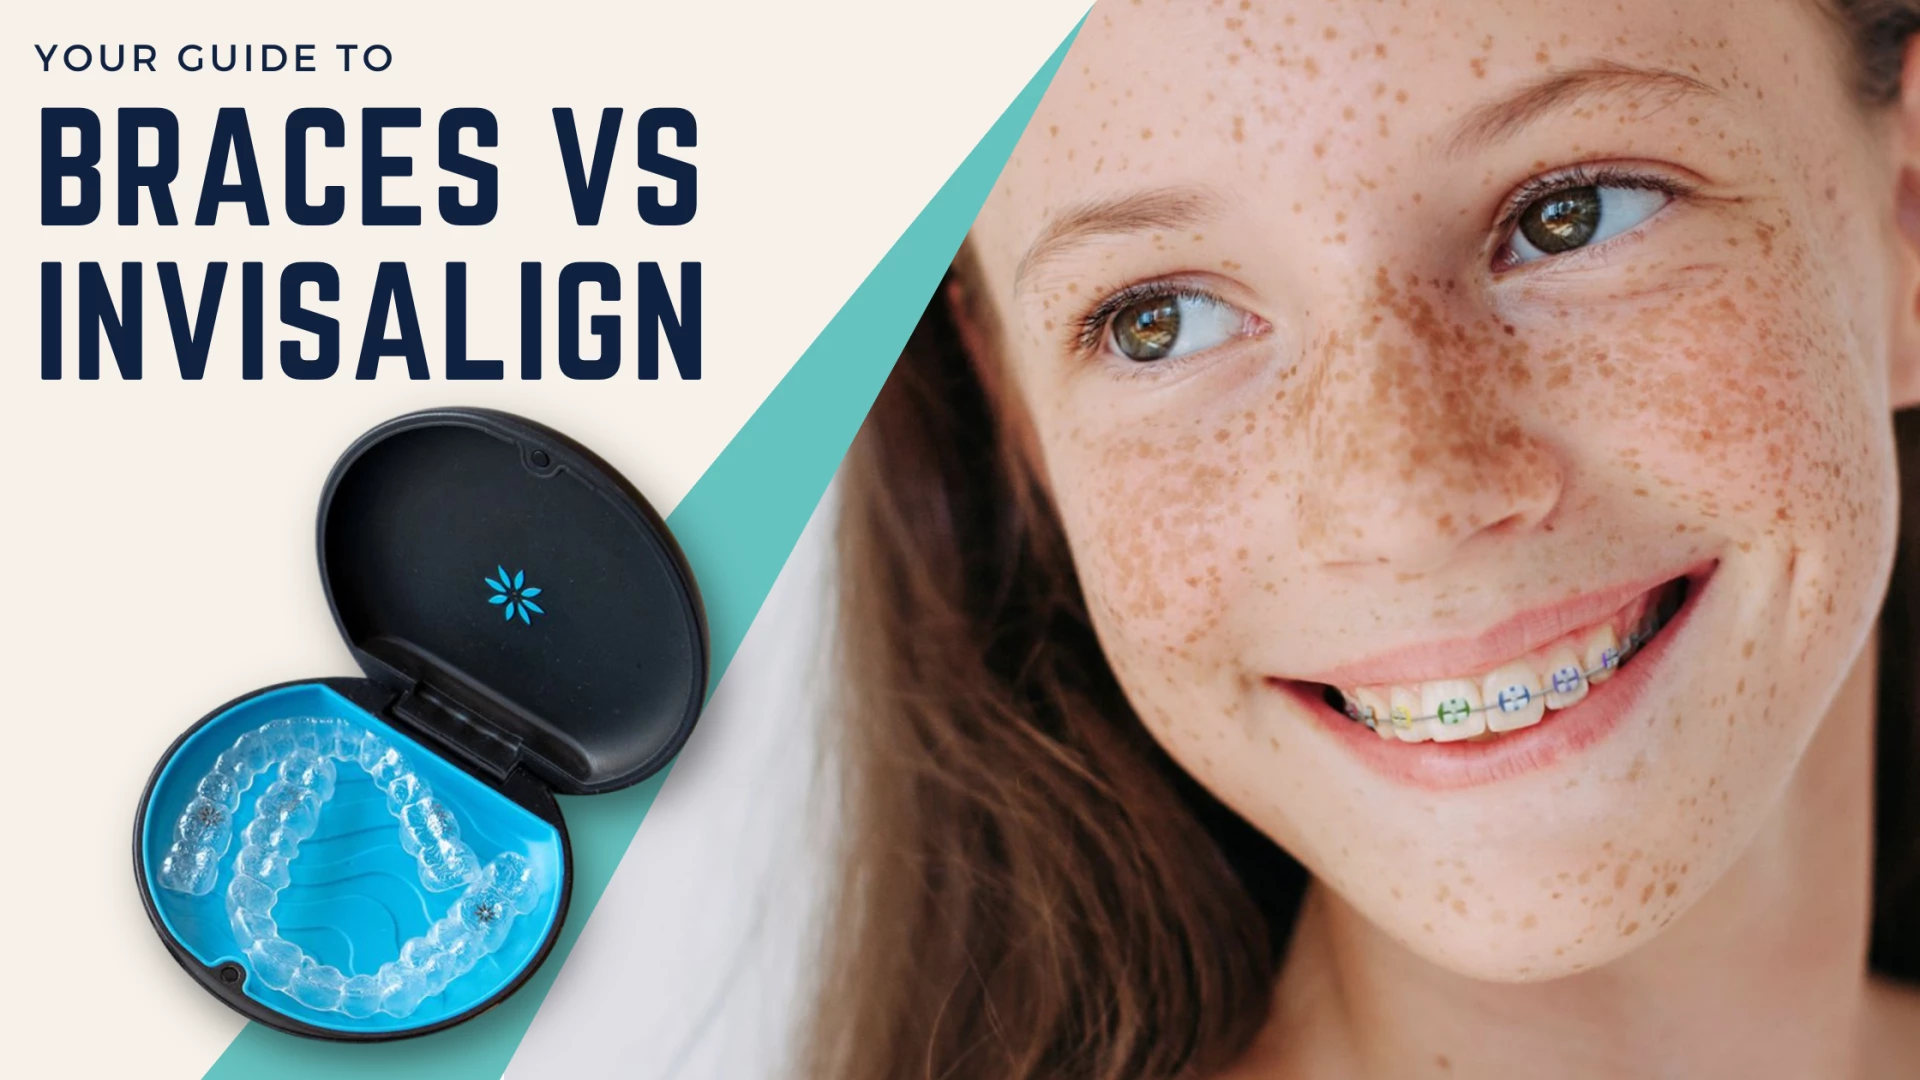 Invisalign Vs. Braces: Cost, Effectiveness, and Appearance